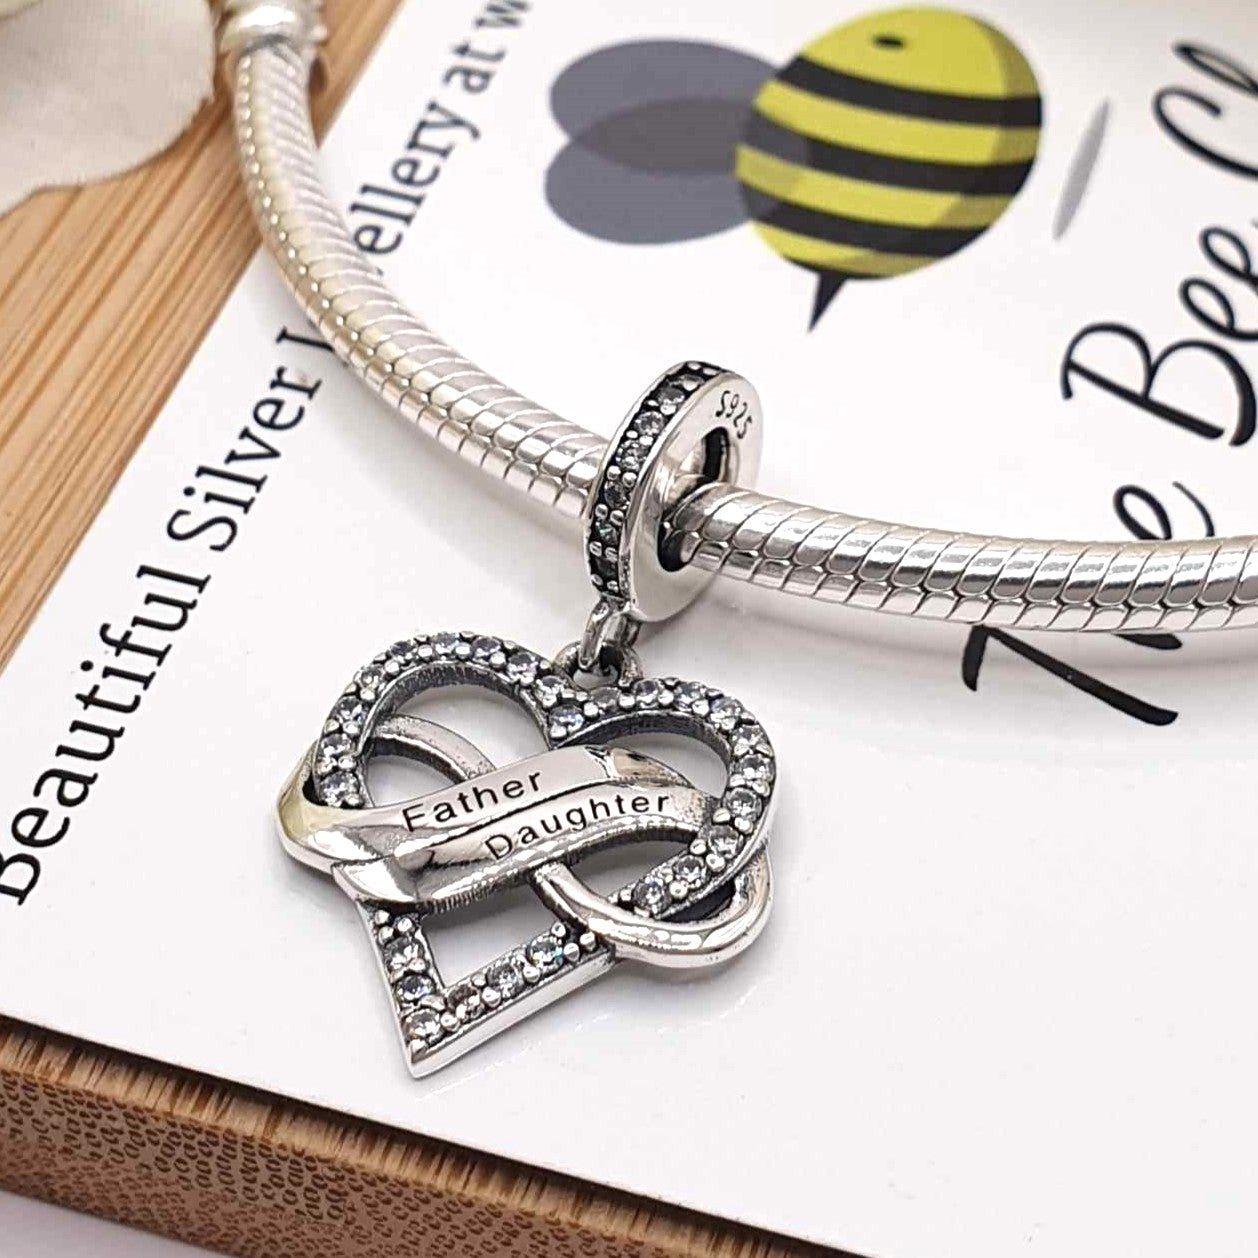 Father & Daughter Love Charm - The Bee Charm